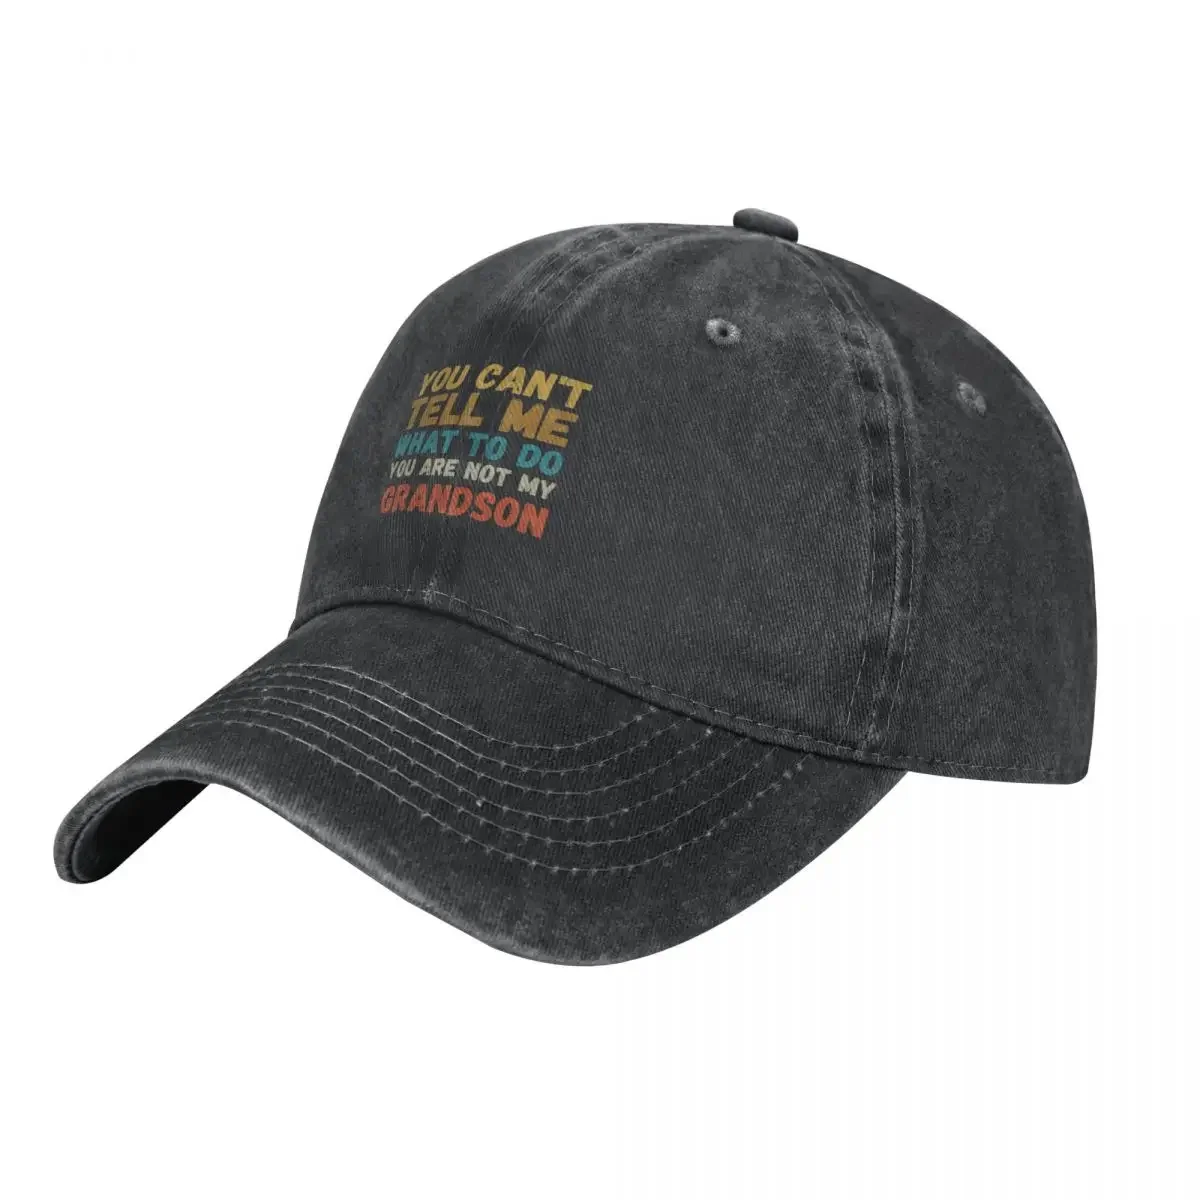 

You Cant Tell Me What To Do Youre Not My Grandson Cowboy Hat Gentleman Hat Visor Rugby Women's Golf Wear Men's